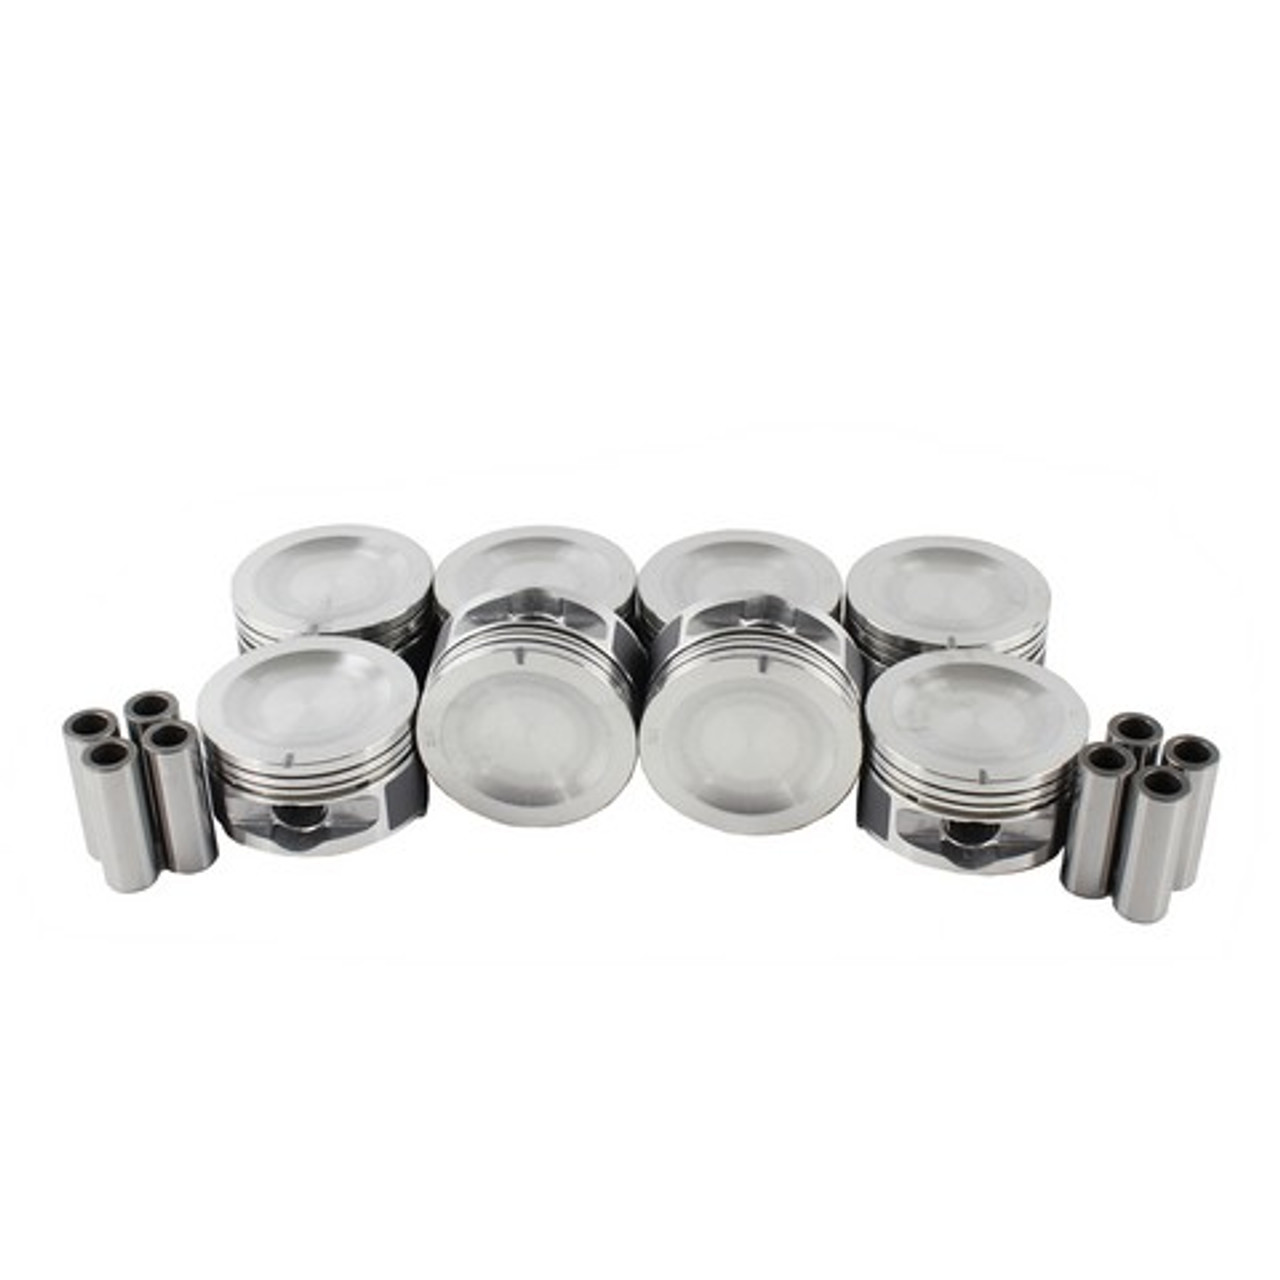 Piston Set 4.6L 1998 Ford Expedition - P4150.15